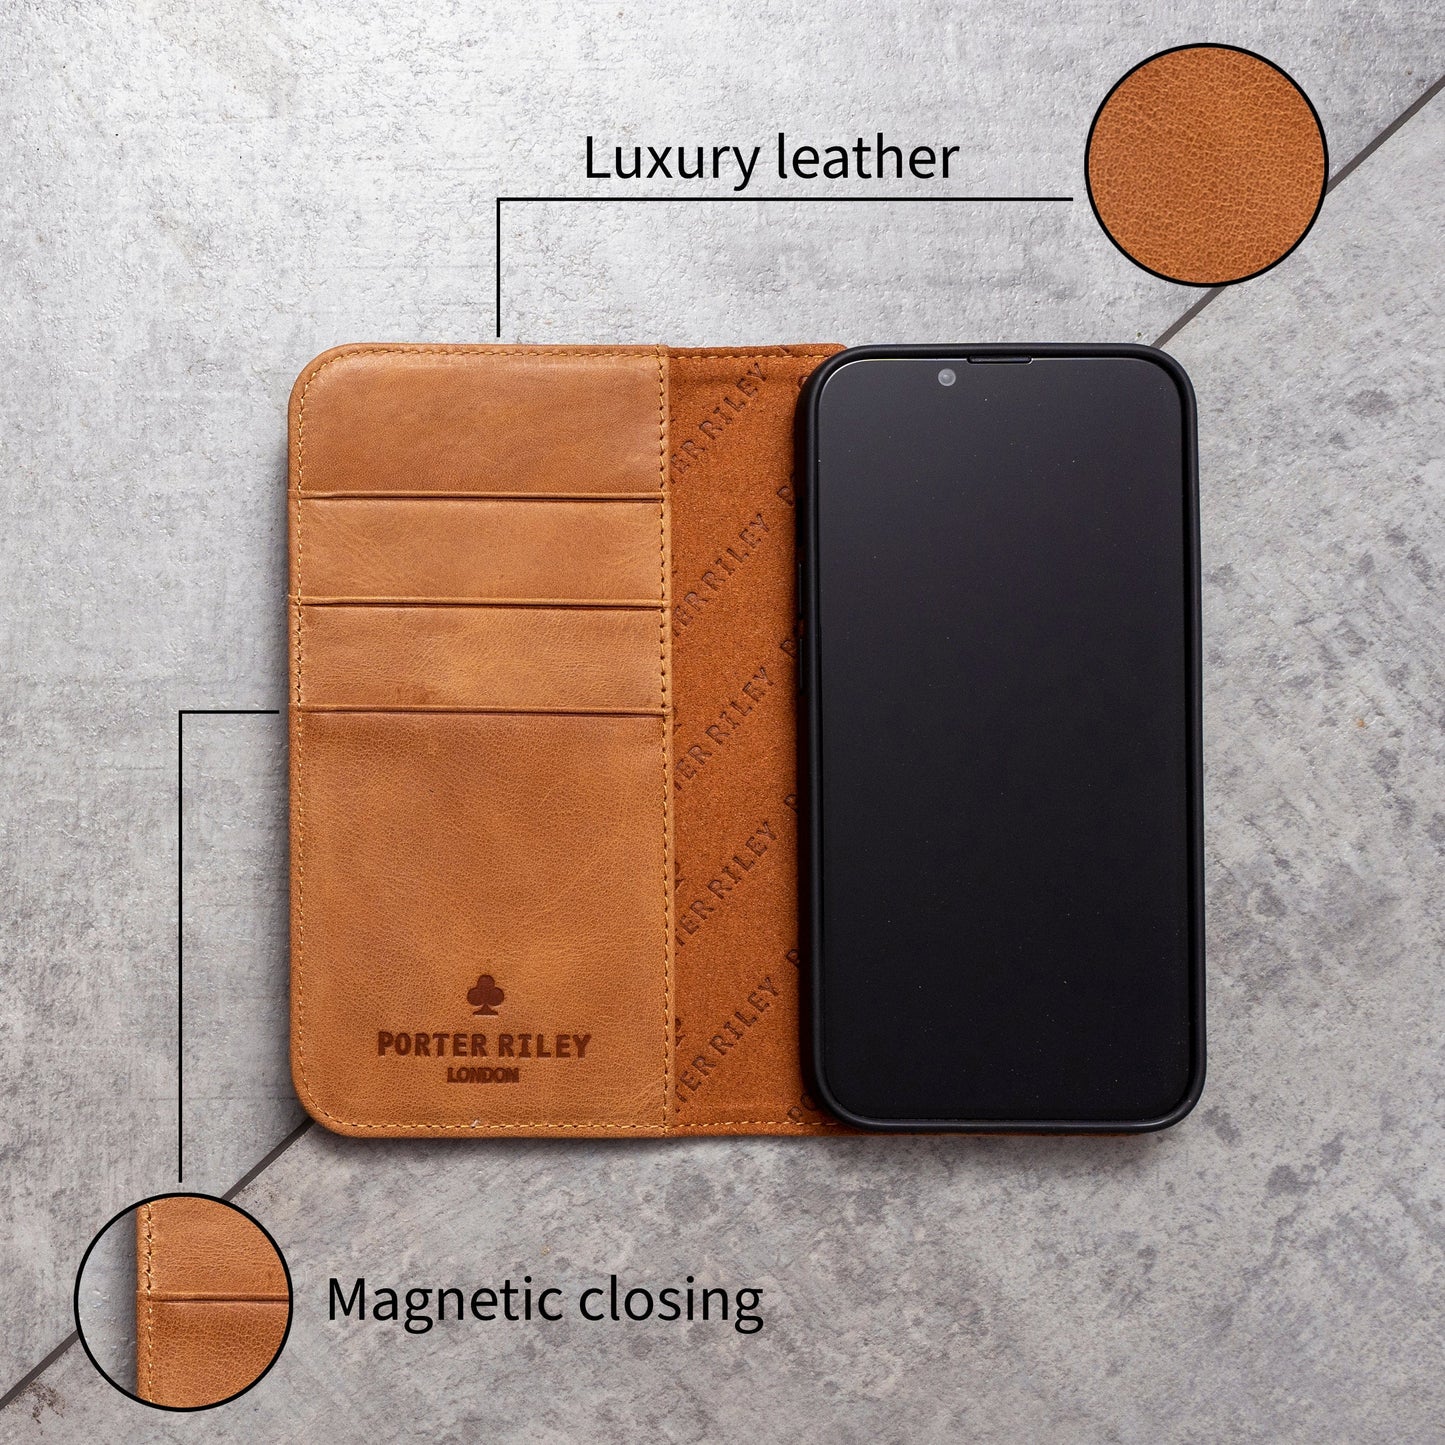 Huawei P10 Leather Case. Premium Slim Genuine Leather Stand Case/Cover/Wallet (Tan)